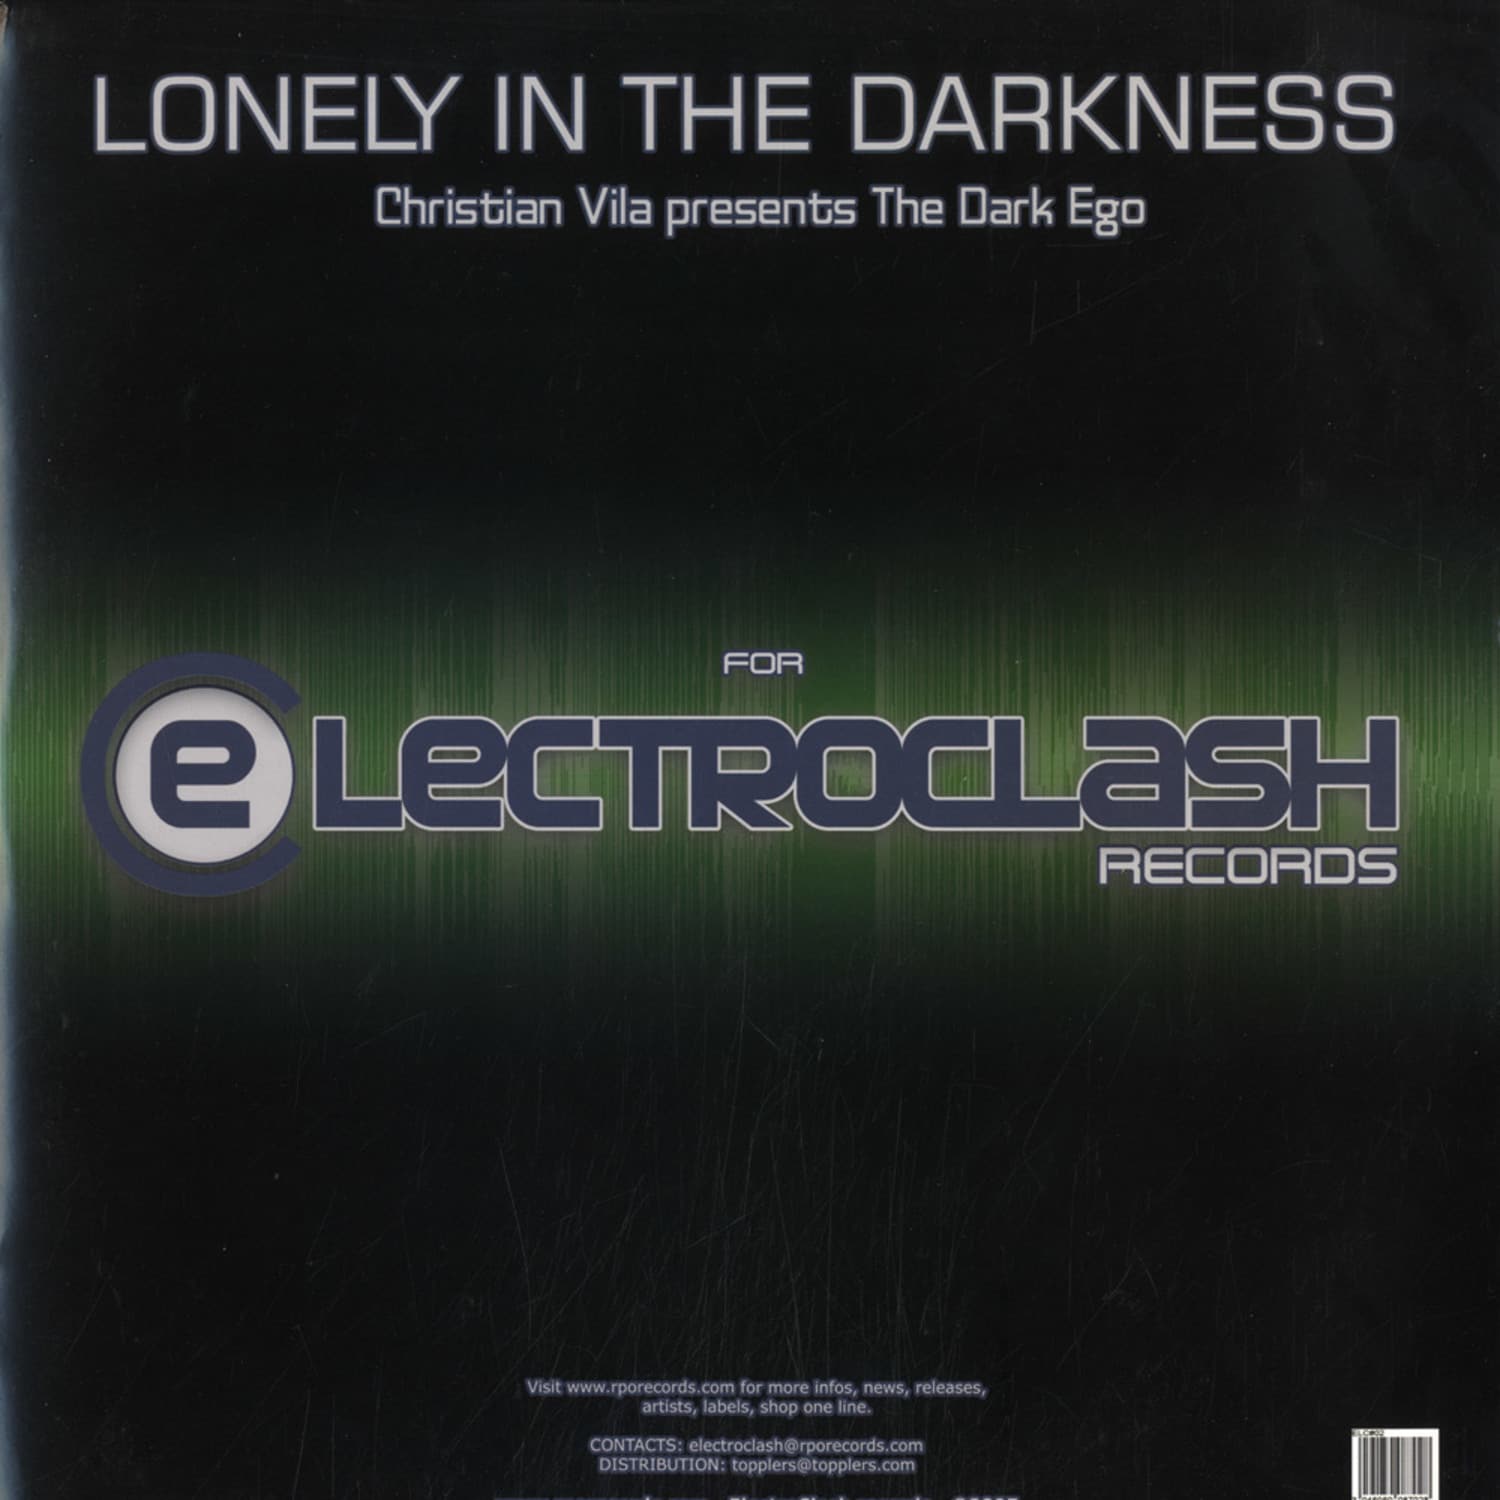 Christian Vila presents The Dark Ego - LONELY IN THE DARKNESS